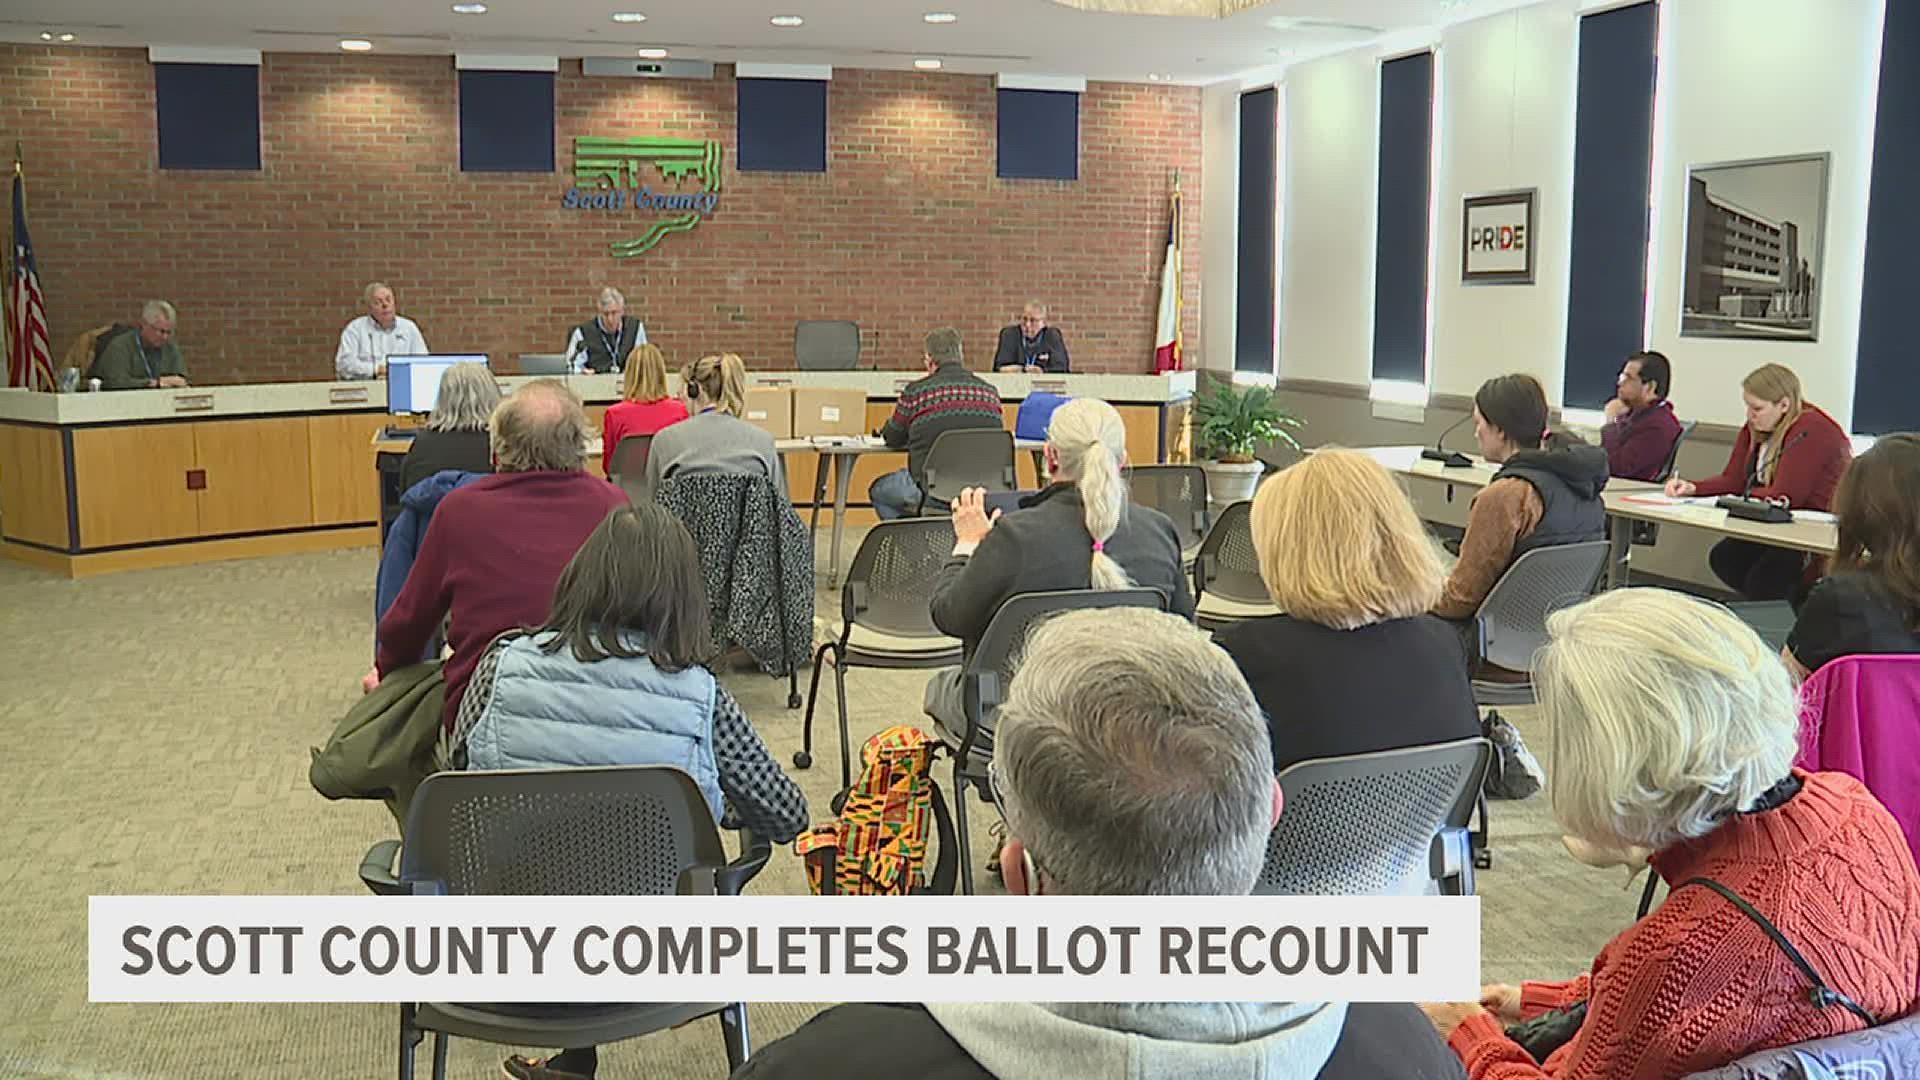 After completing a recount of over 23,000 ballots, Scott County officials released the final results, revealing that one race had flipped.